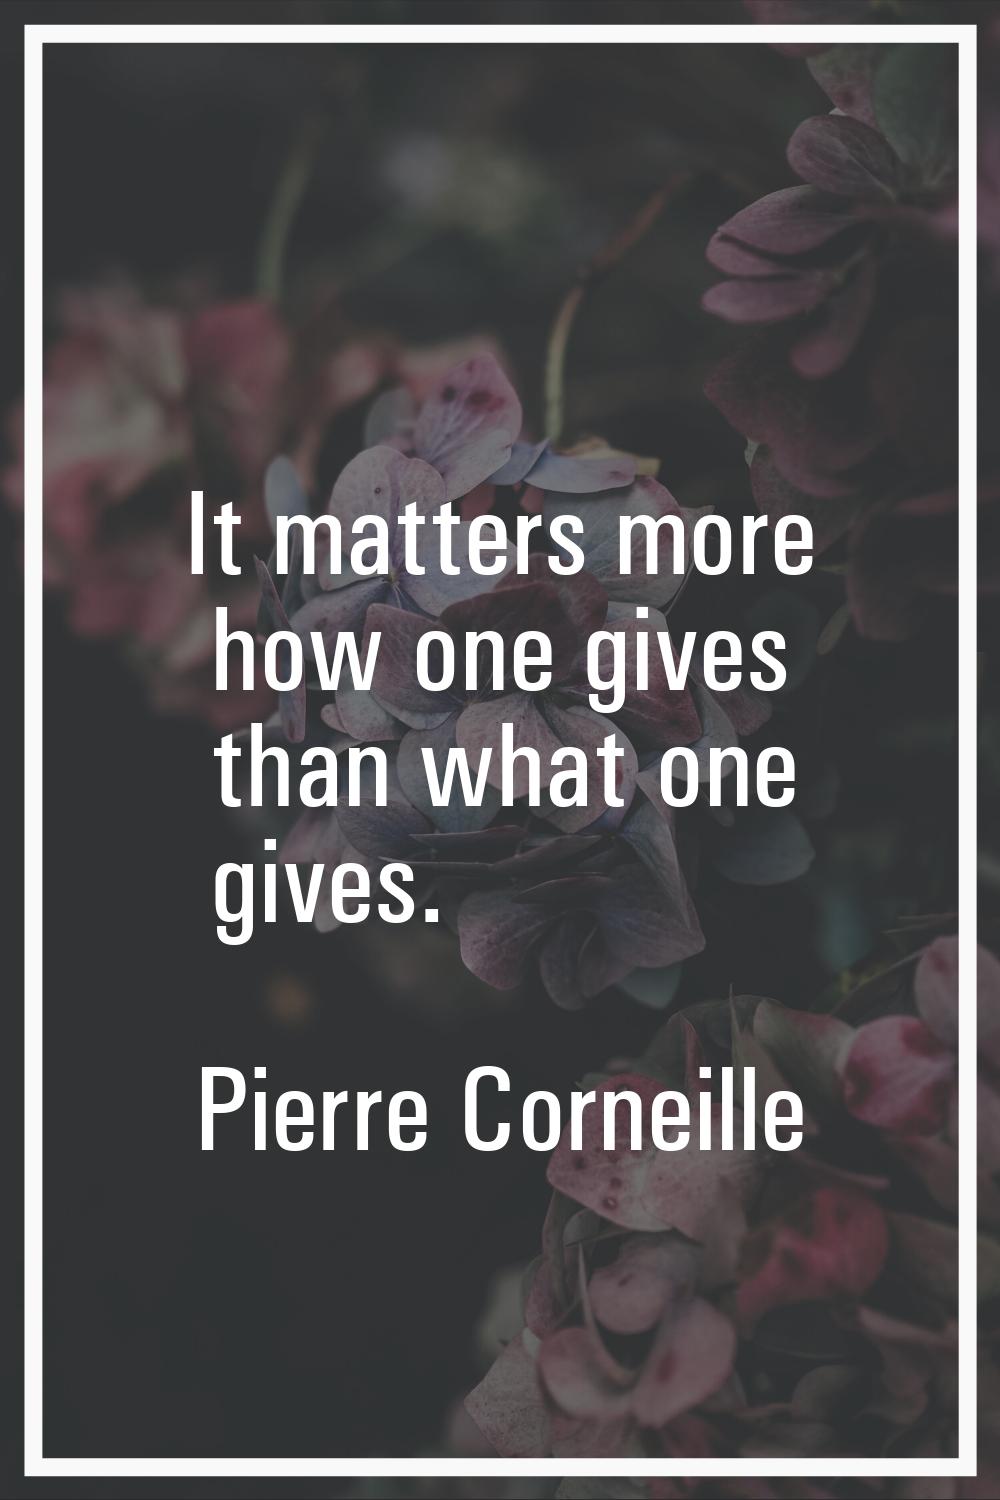 It matters more how one gives than what one gives.